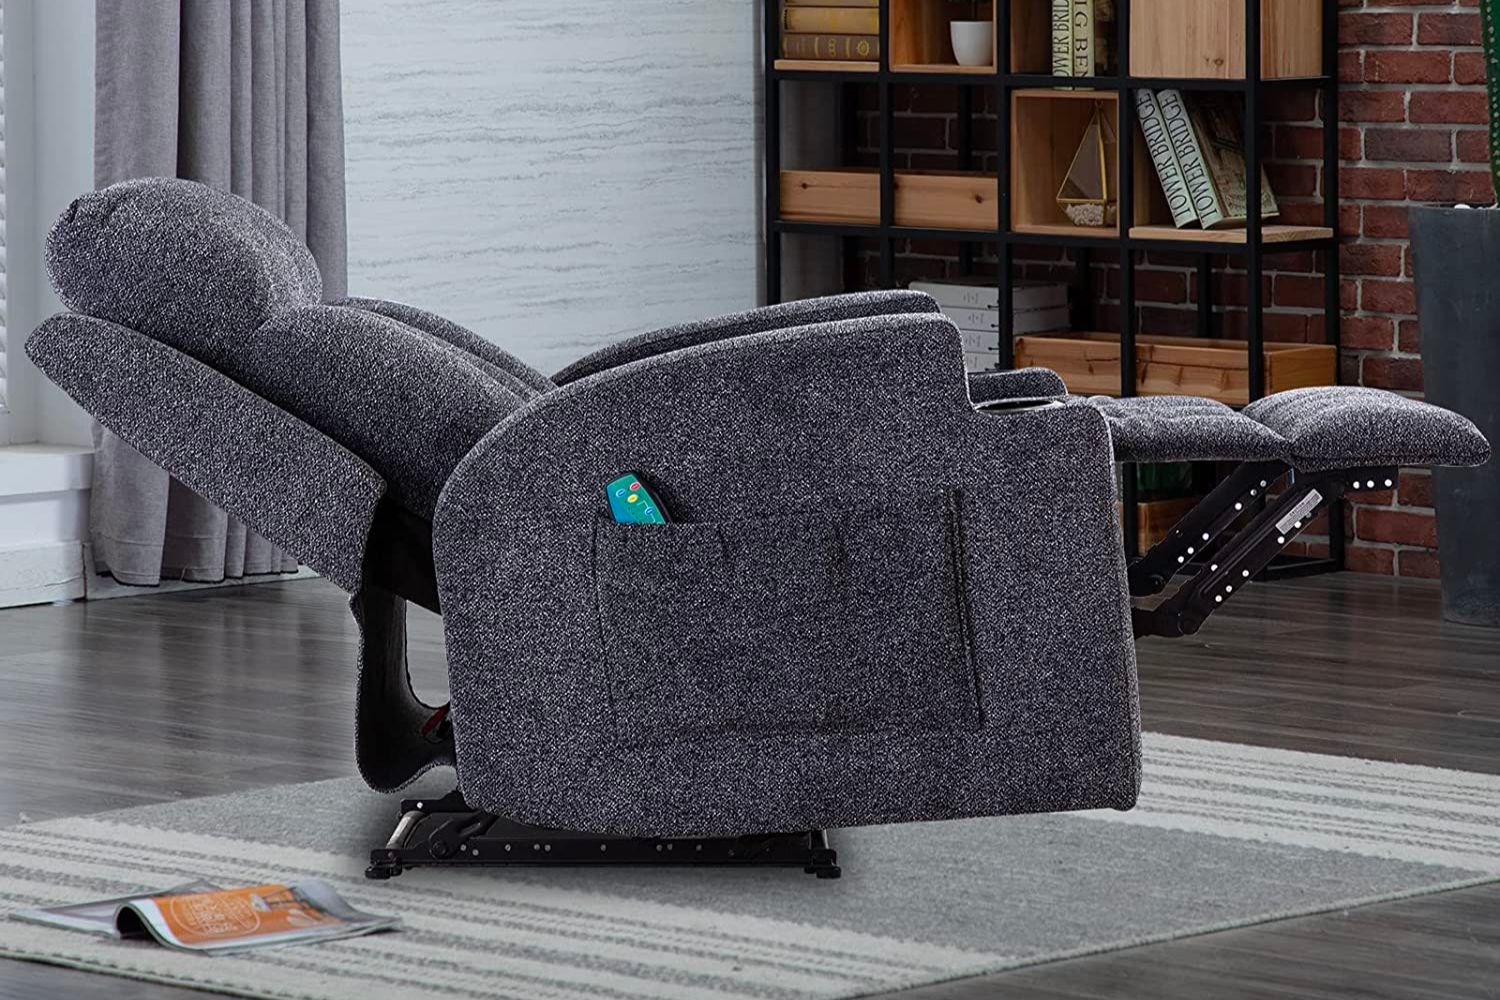 The Best Recliners for Back Pain Option in a reclined position with its remote in a side pocket